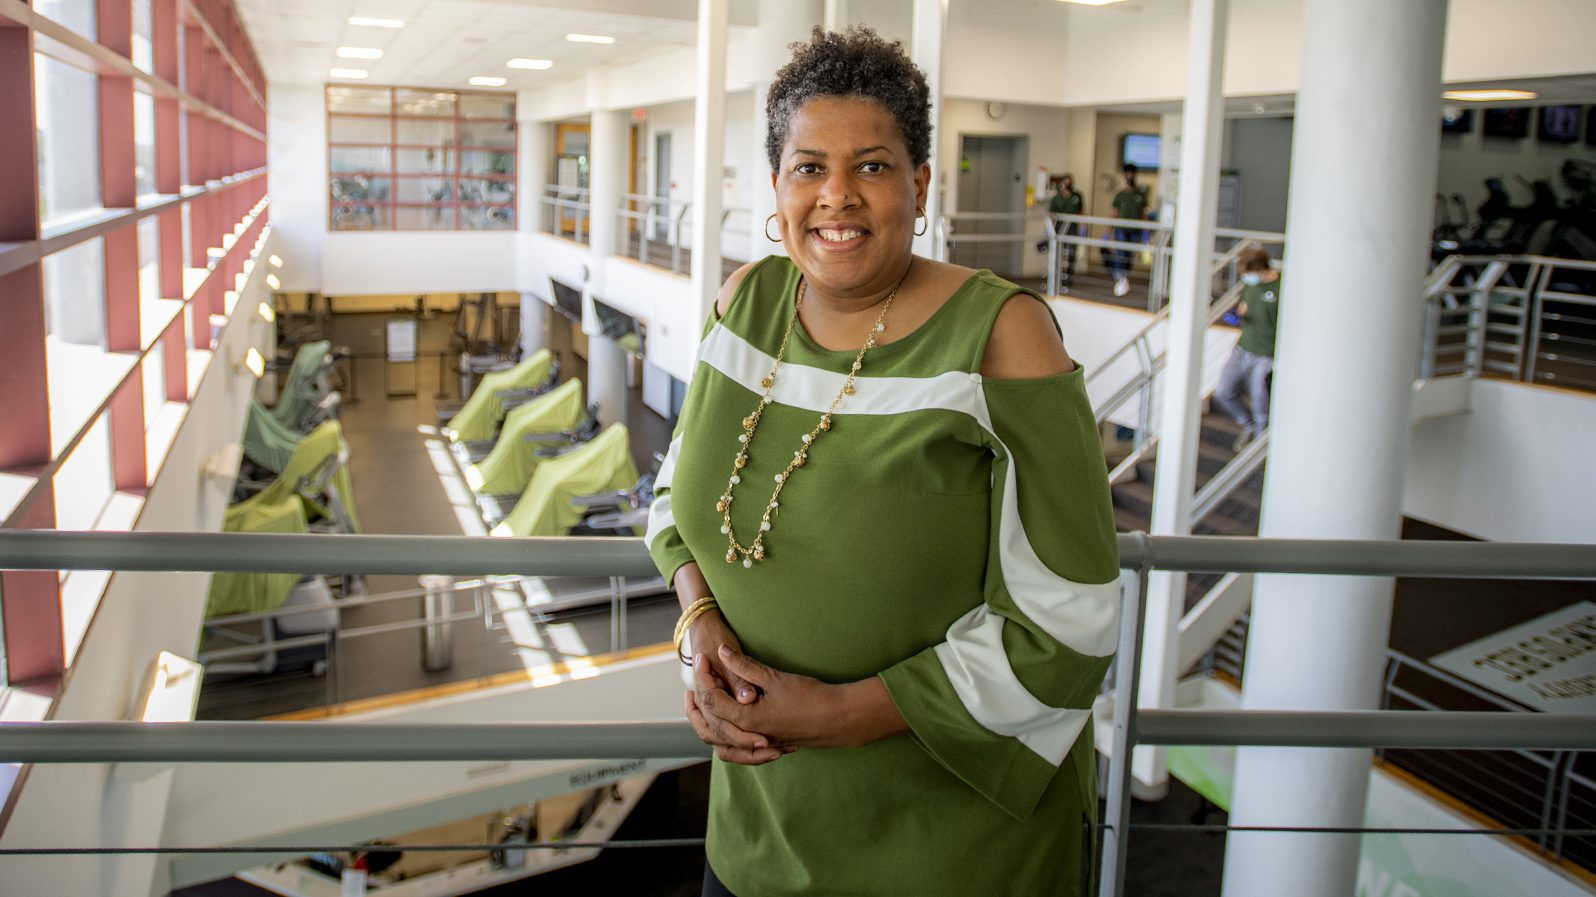 Wendy Windsor, Clemson graduate ('97), serves as director of Campus Recreation at Tulane University